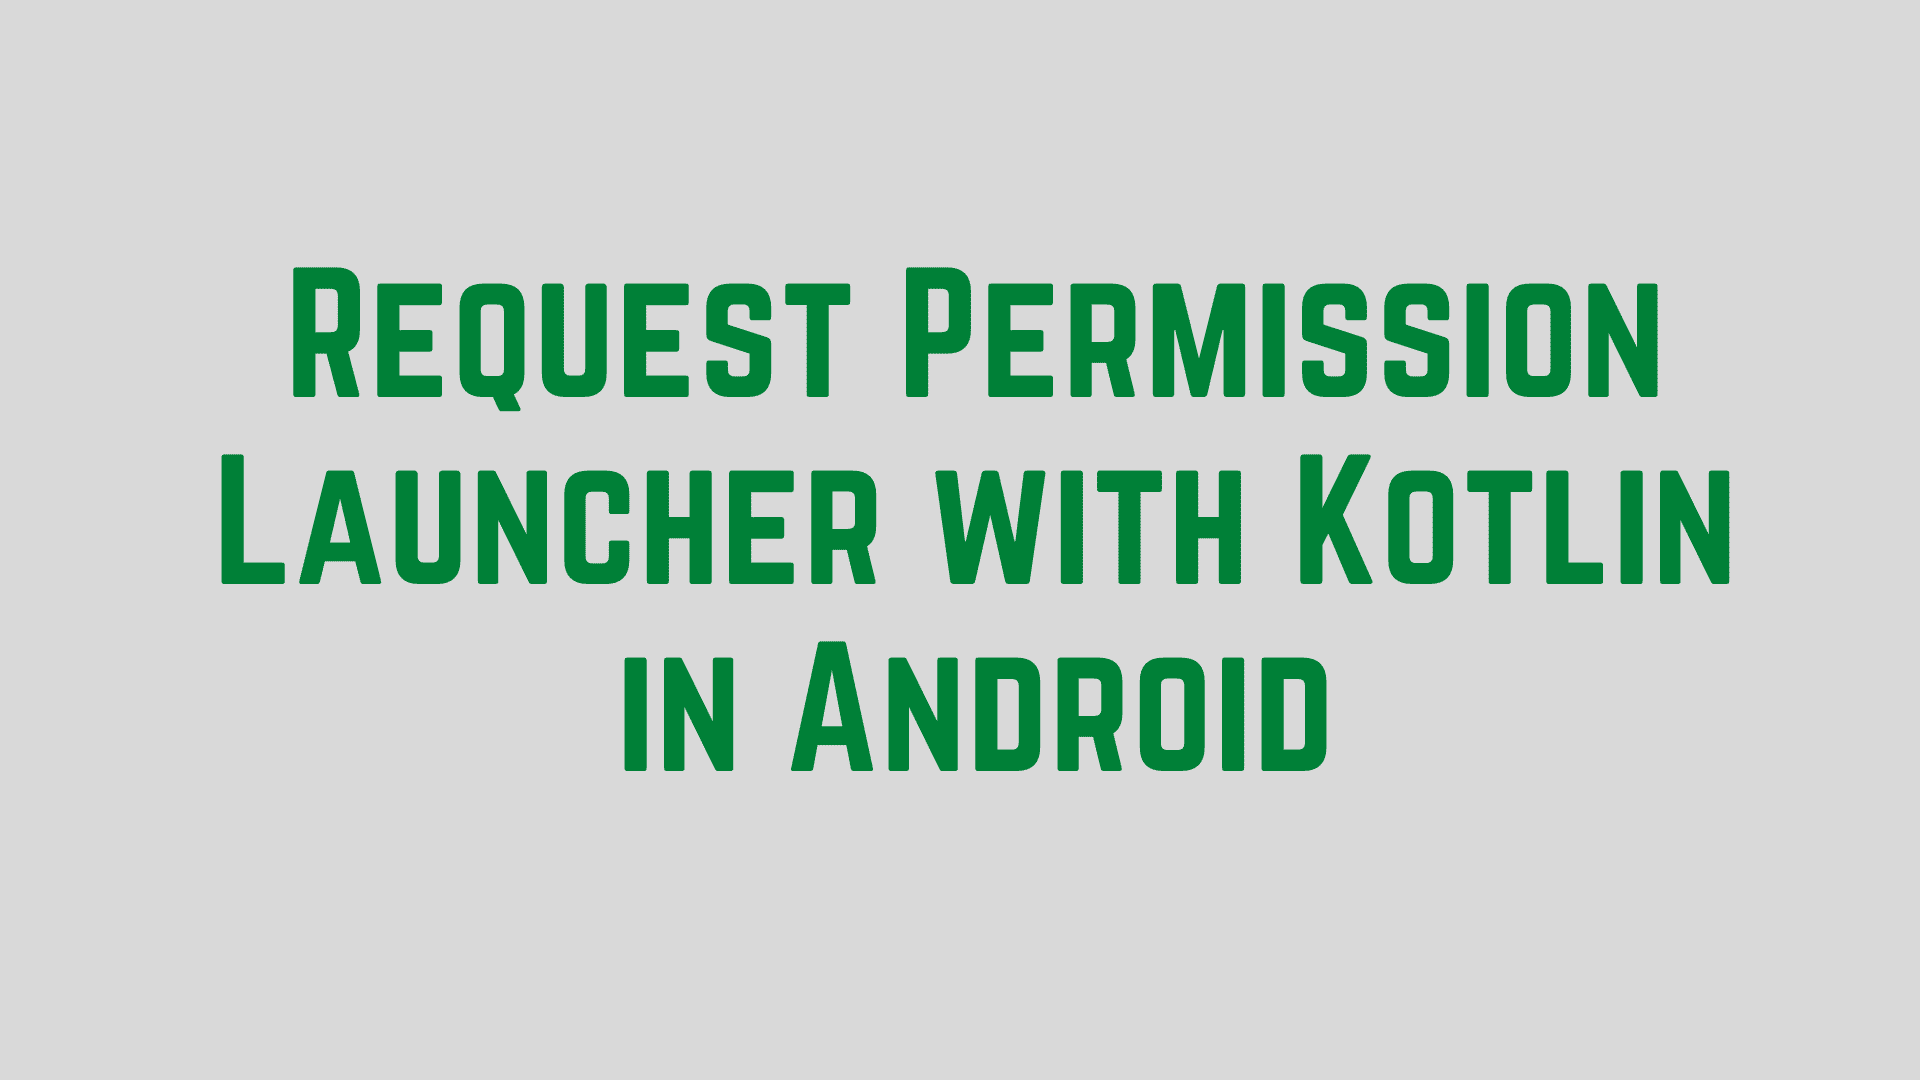 Request Permission Launcher with Kotlin in Android